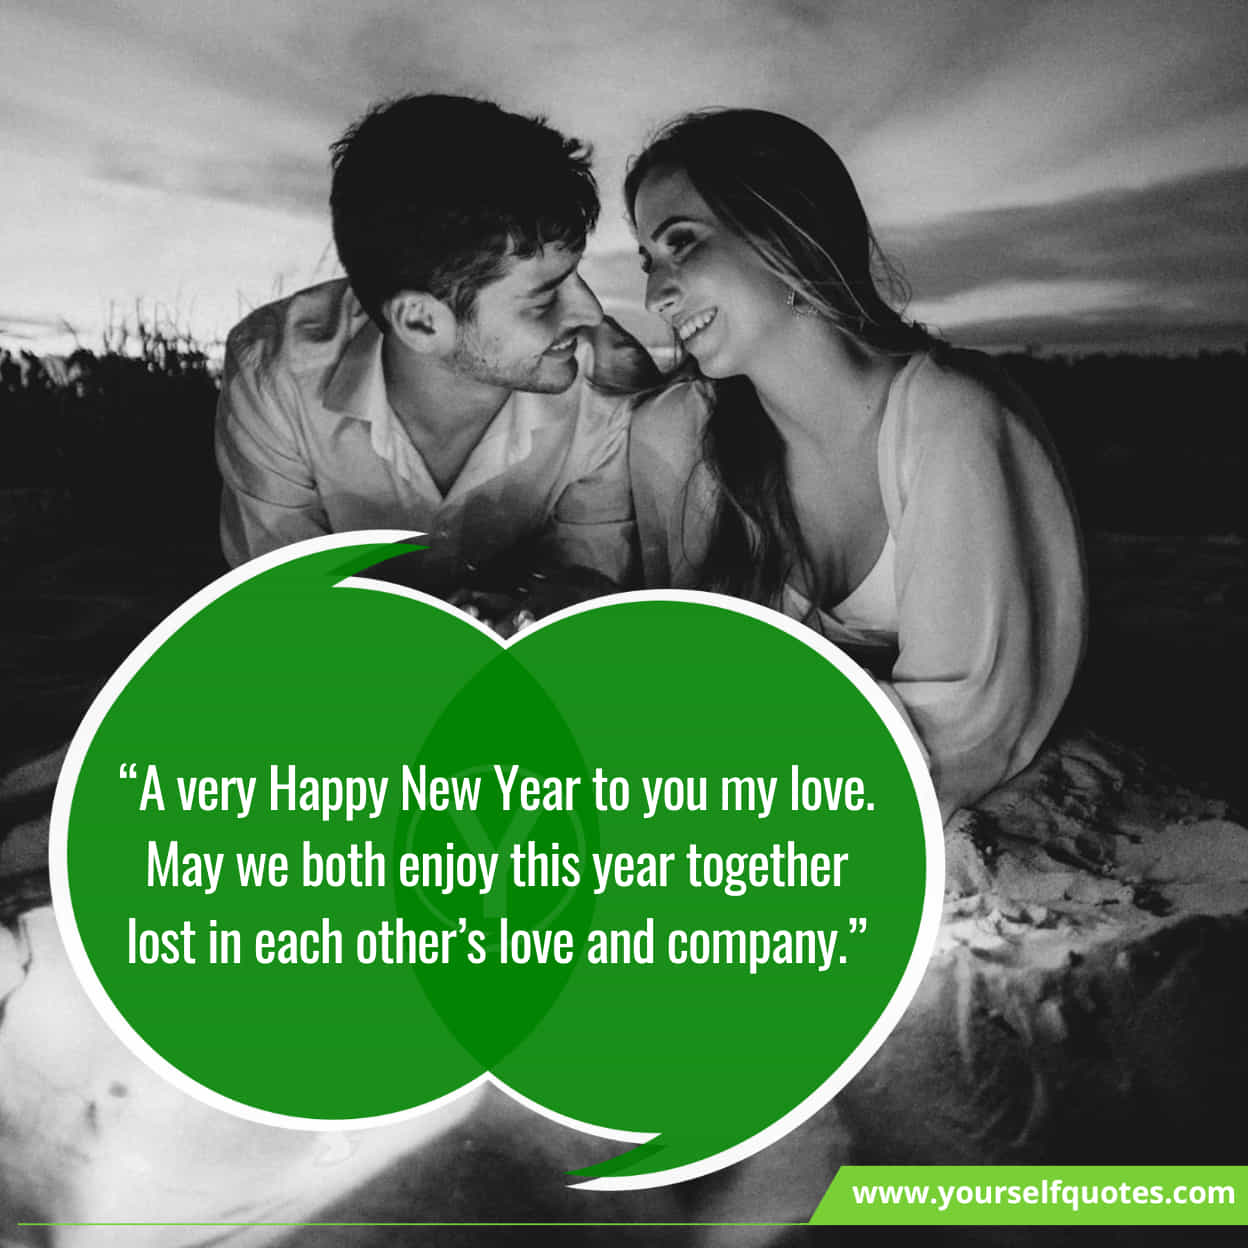 112 Happy New Year Greetings For Love To Feel The New Year